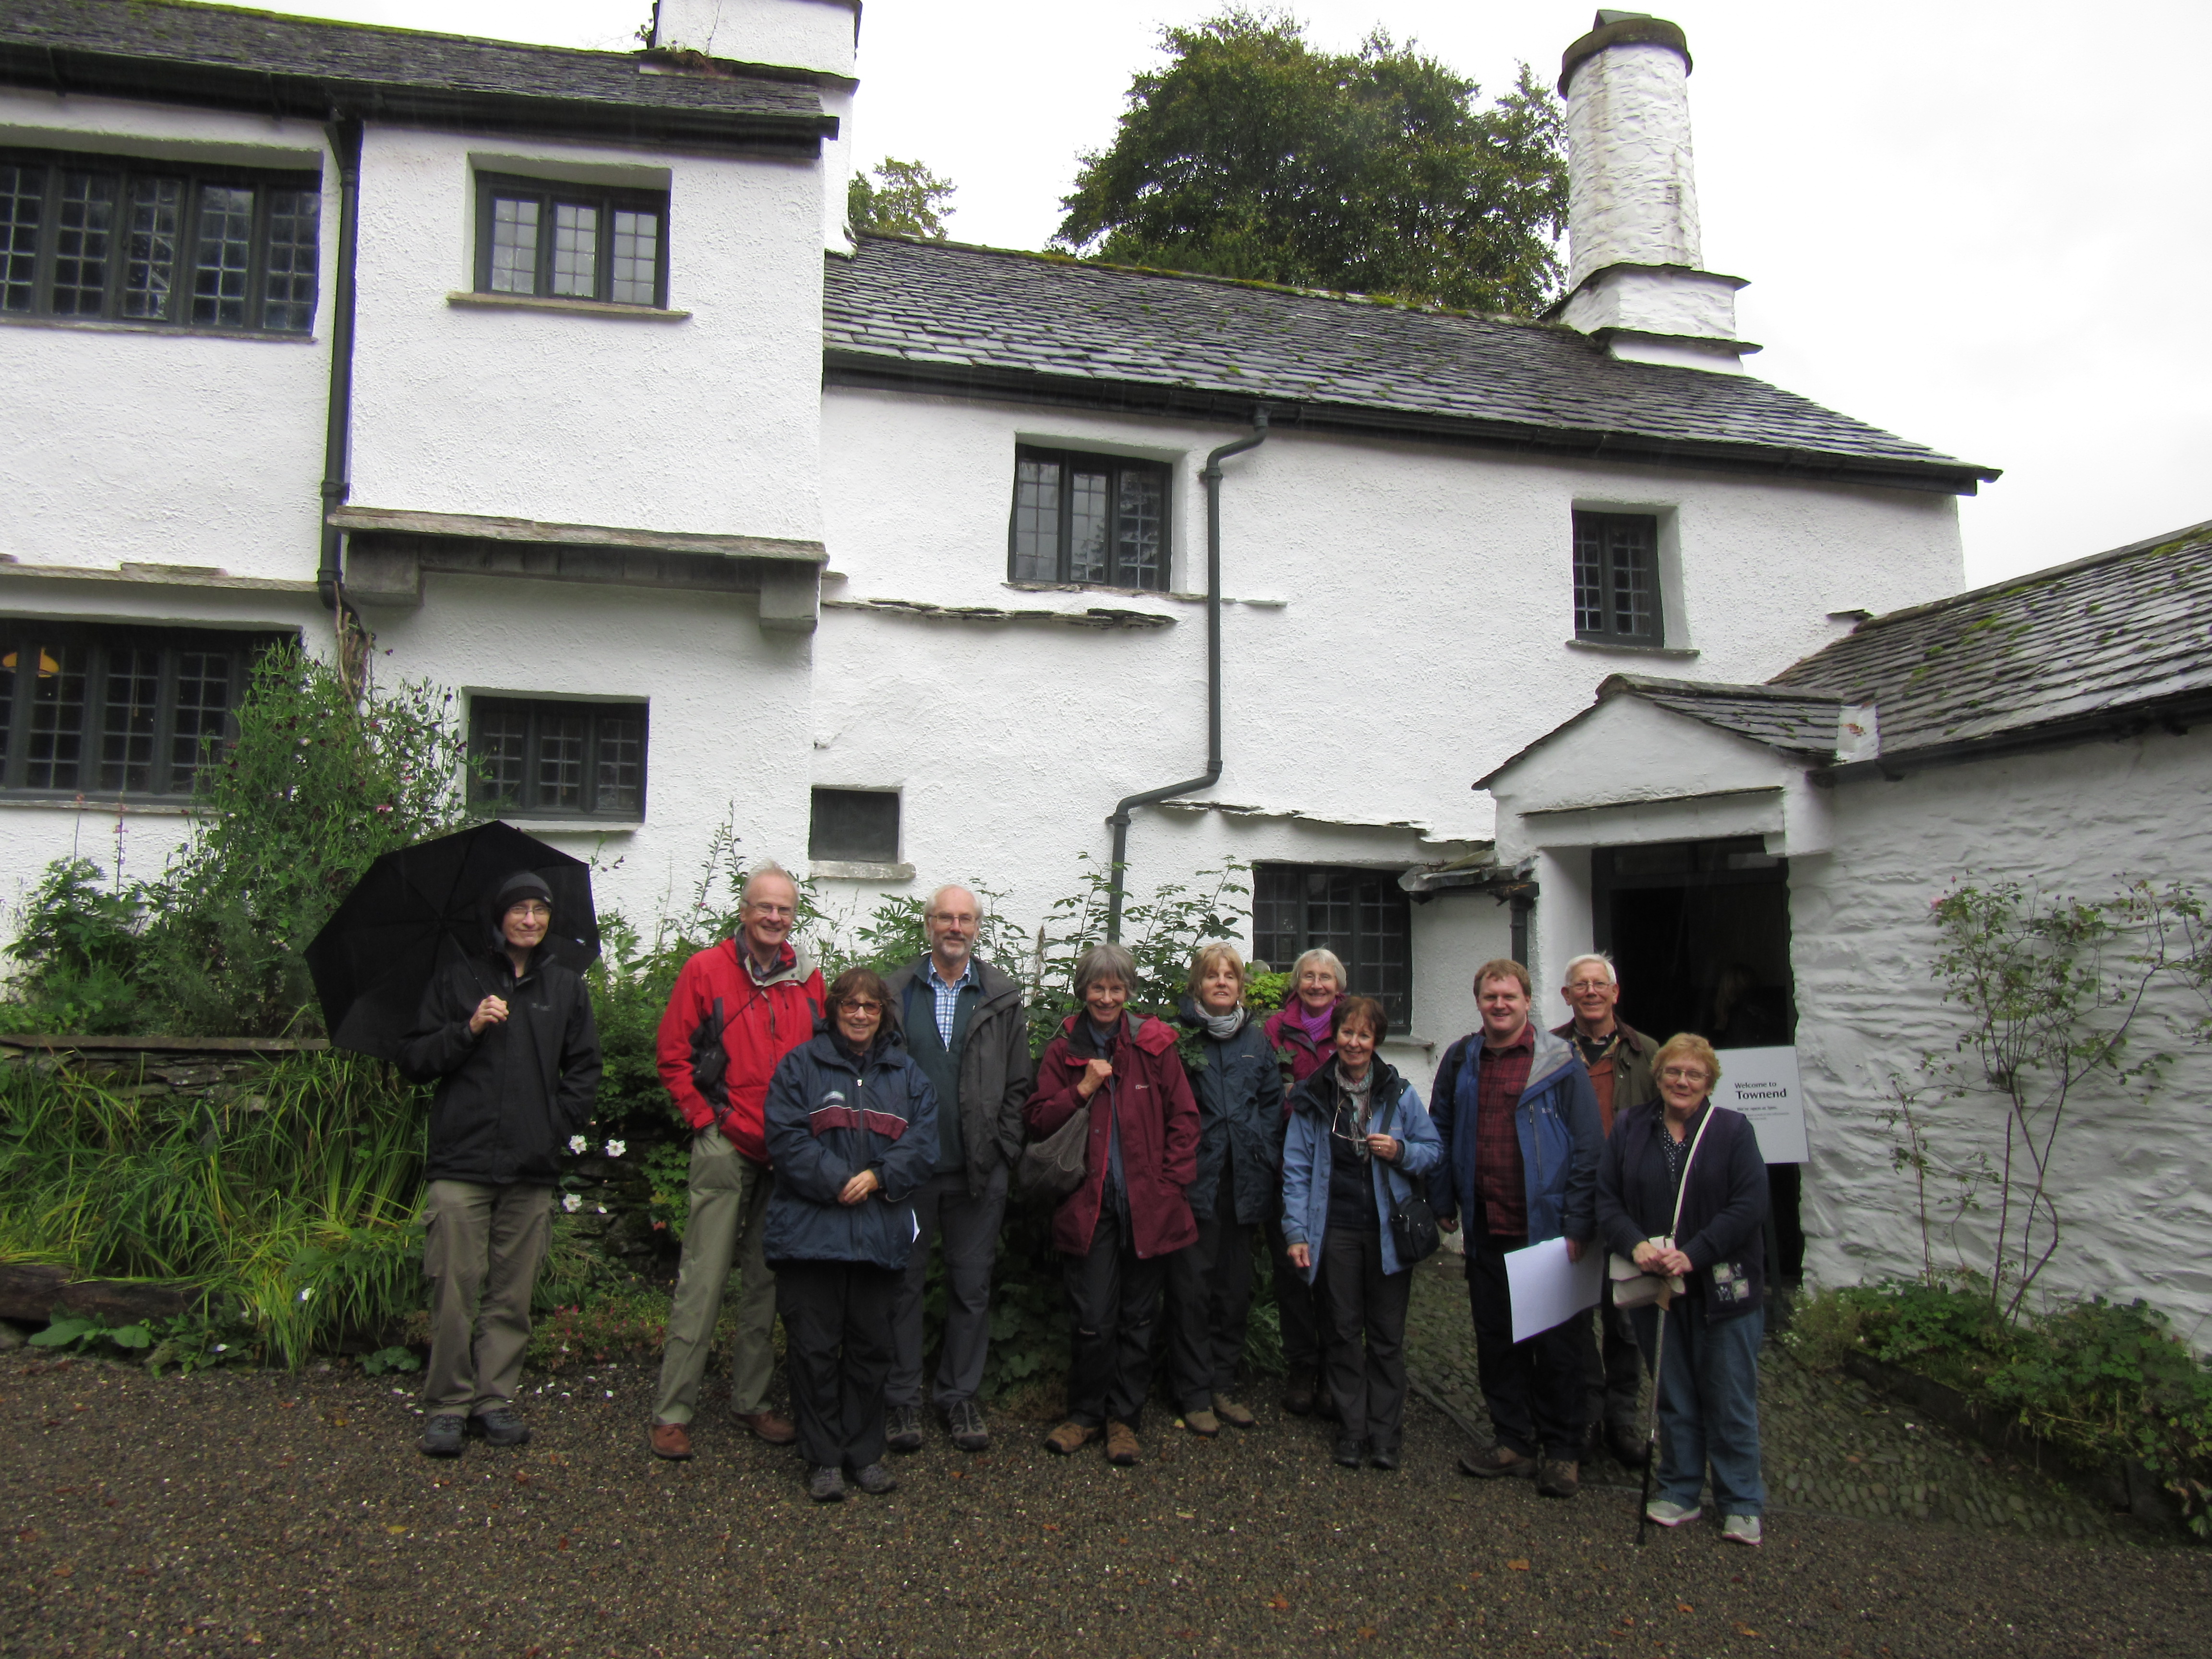 VCH Cumbria volunteers outside National Trust Townend, a traditional 17th century farmhouse and home of the Browne family, a wealthy yeoman dynasty.